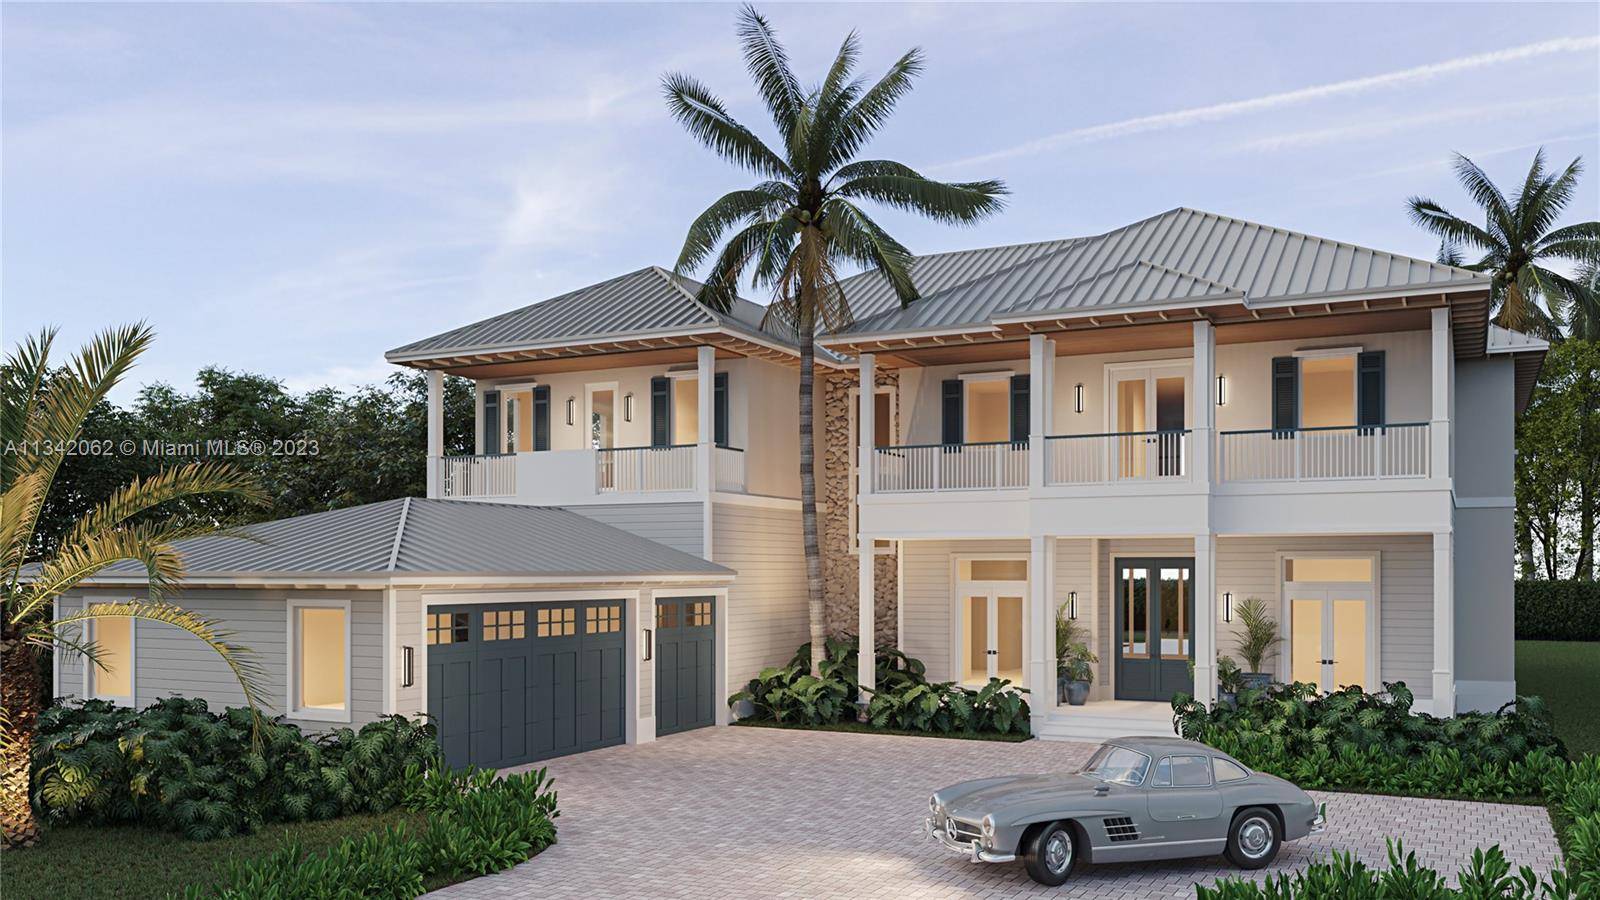 A rare opportunity to customize your luxurious Florida coastal home in coveted Ponce Davis with award winning Hollub Group.